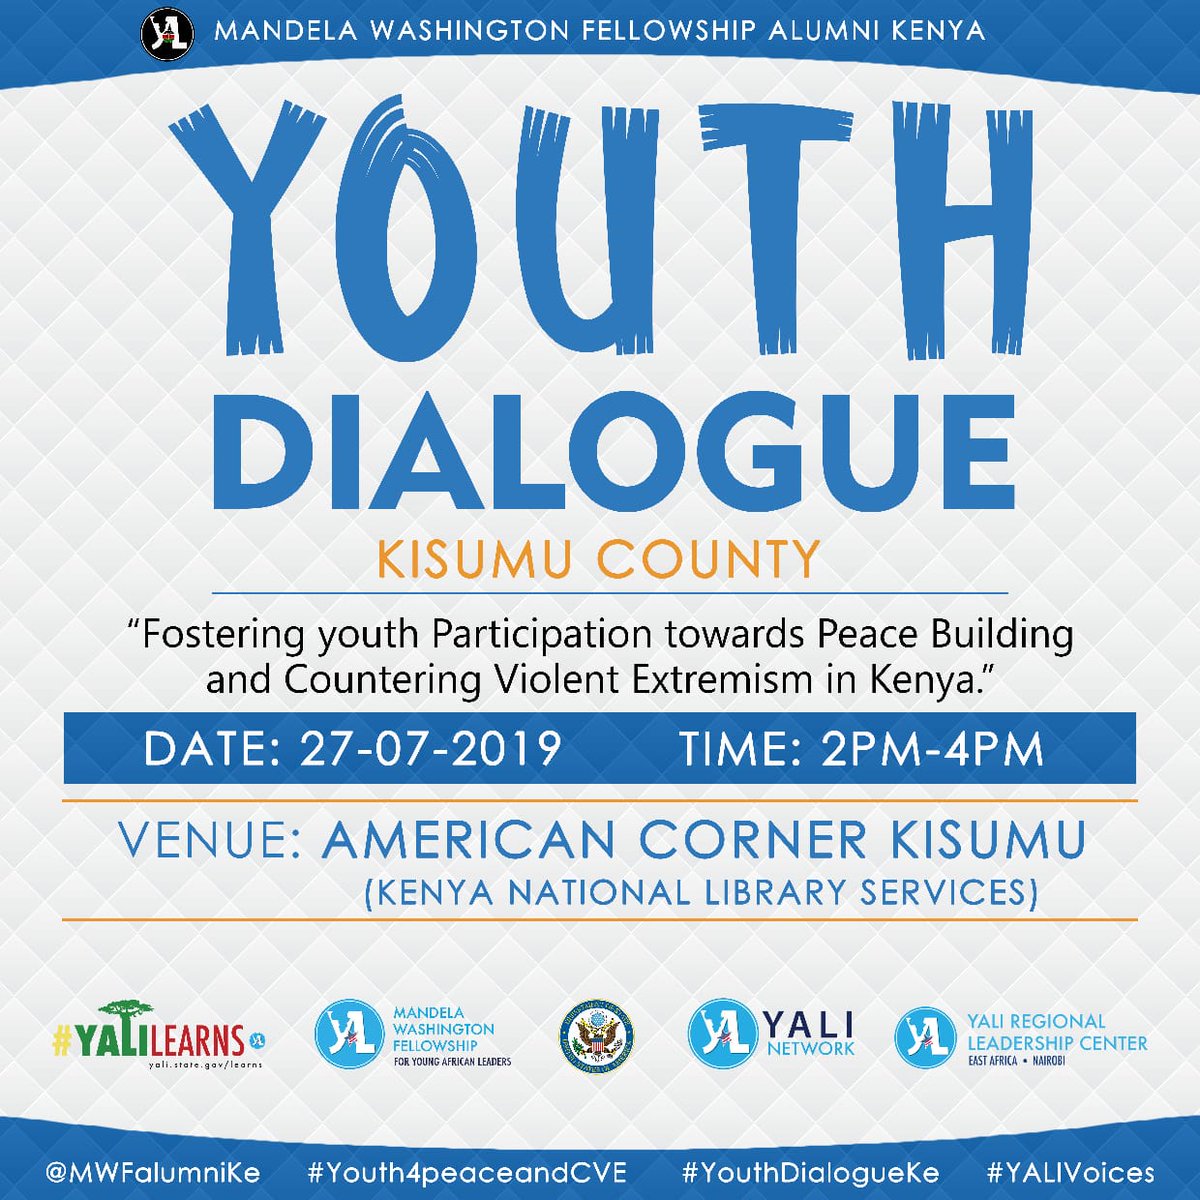 Saturday 27th July at Kisumu Library American Corner we will be having a dialogue on empowering the young people through academic coursework,leadership training and networking.Ya'll welcome❤
@MWFalumniKE 
#Youth4peaceandCVE 
#YouthDialogueKe 
#YALIVoices 
@AmazingKisumu 
@Kisumu